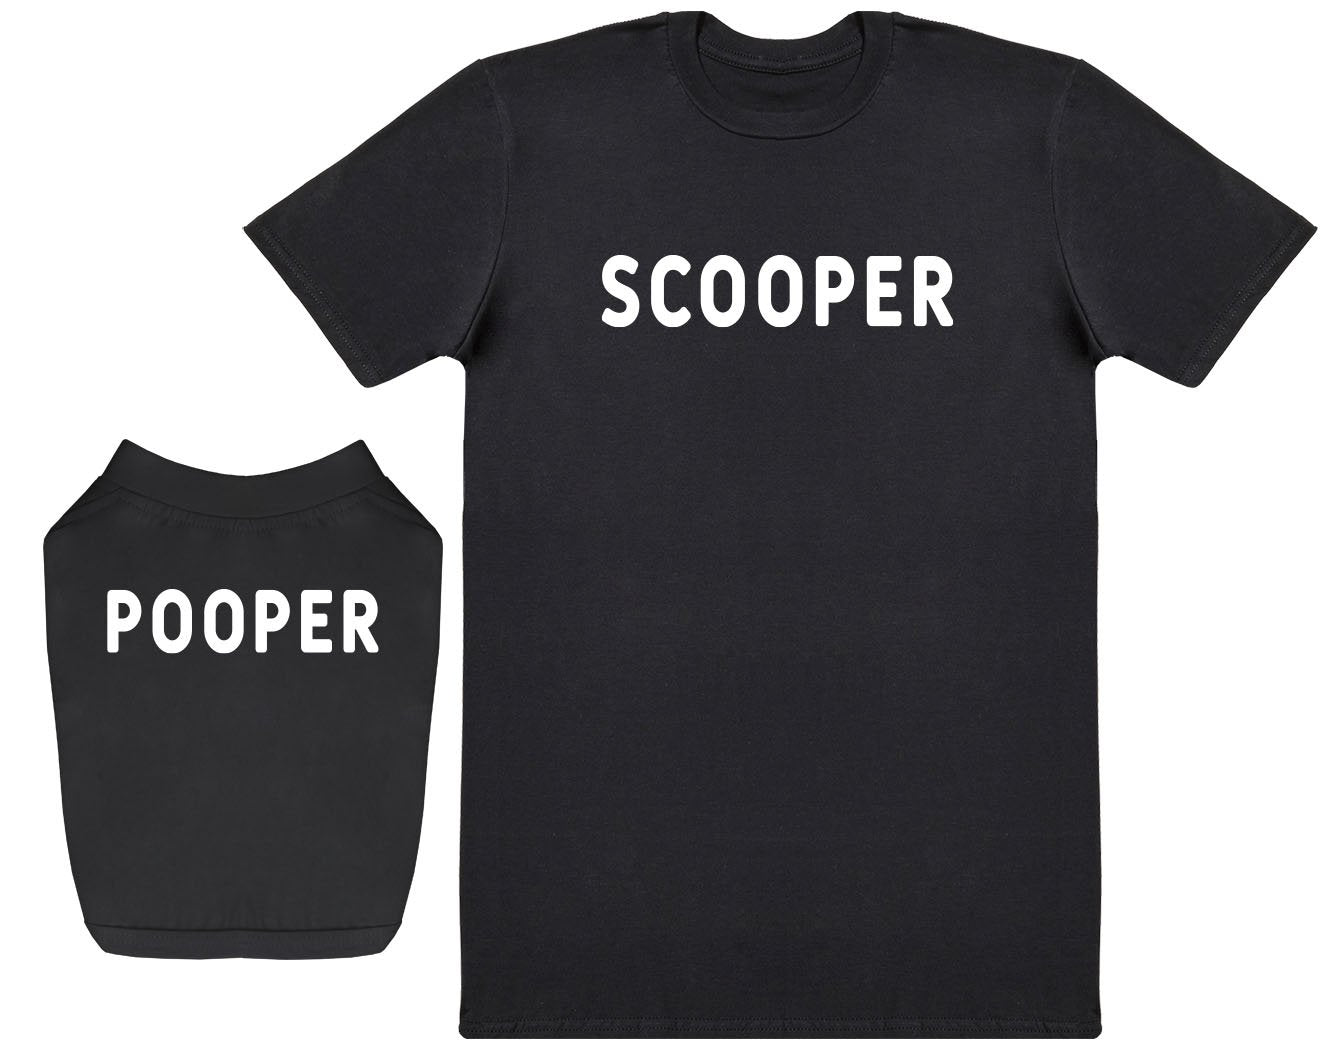 Pooper & Scooper - Dog T-Shirt And Mens/Womens T-Shirt Set - (Sold Separately)